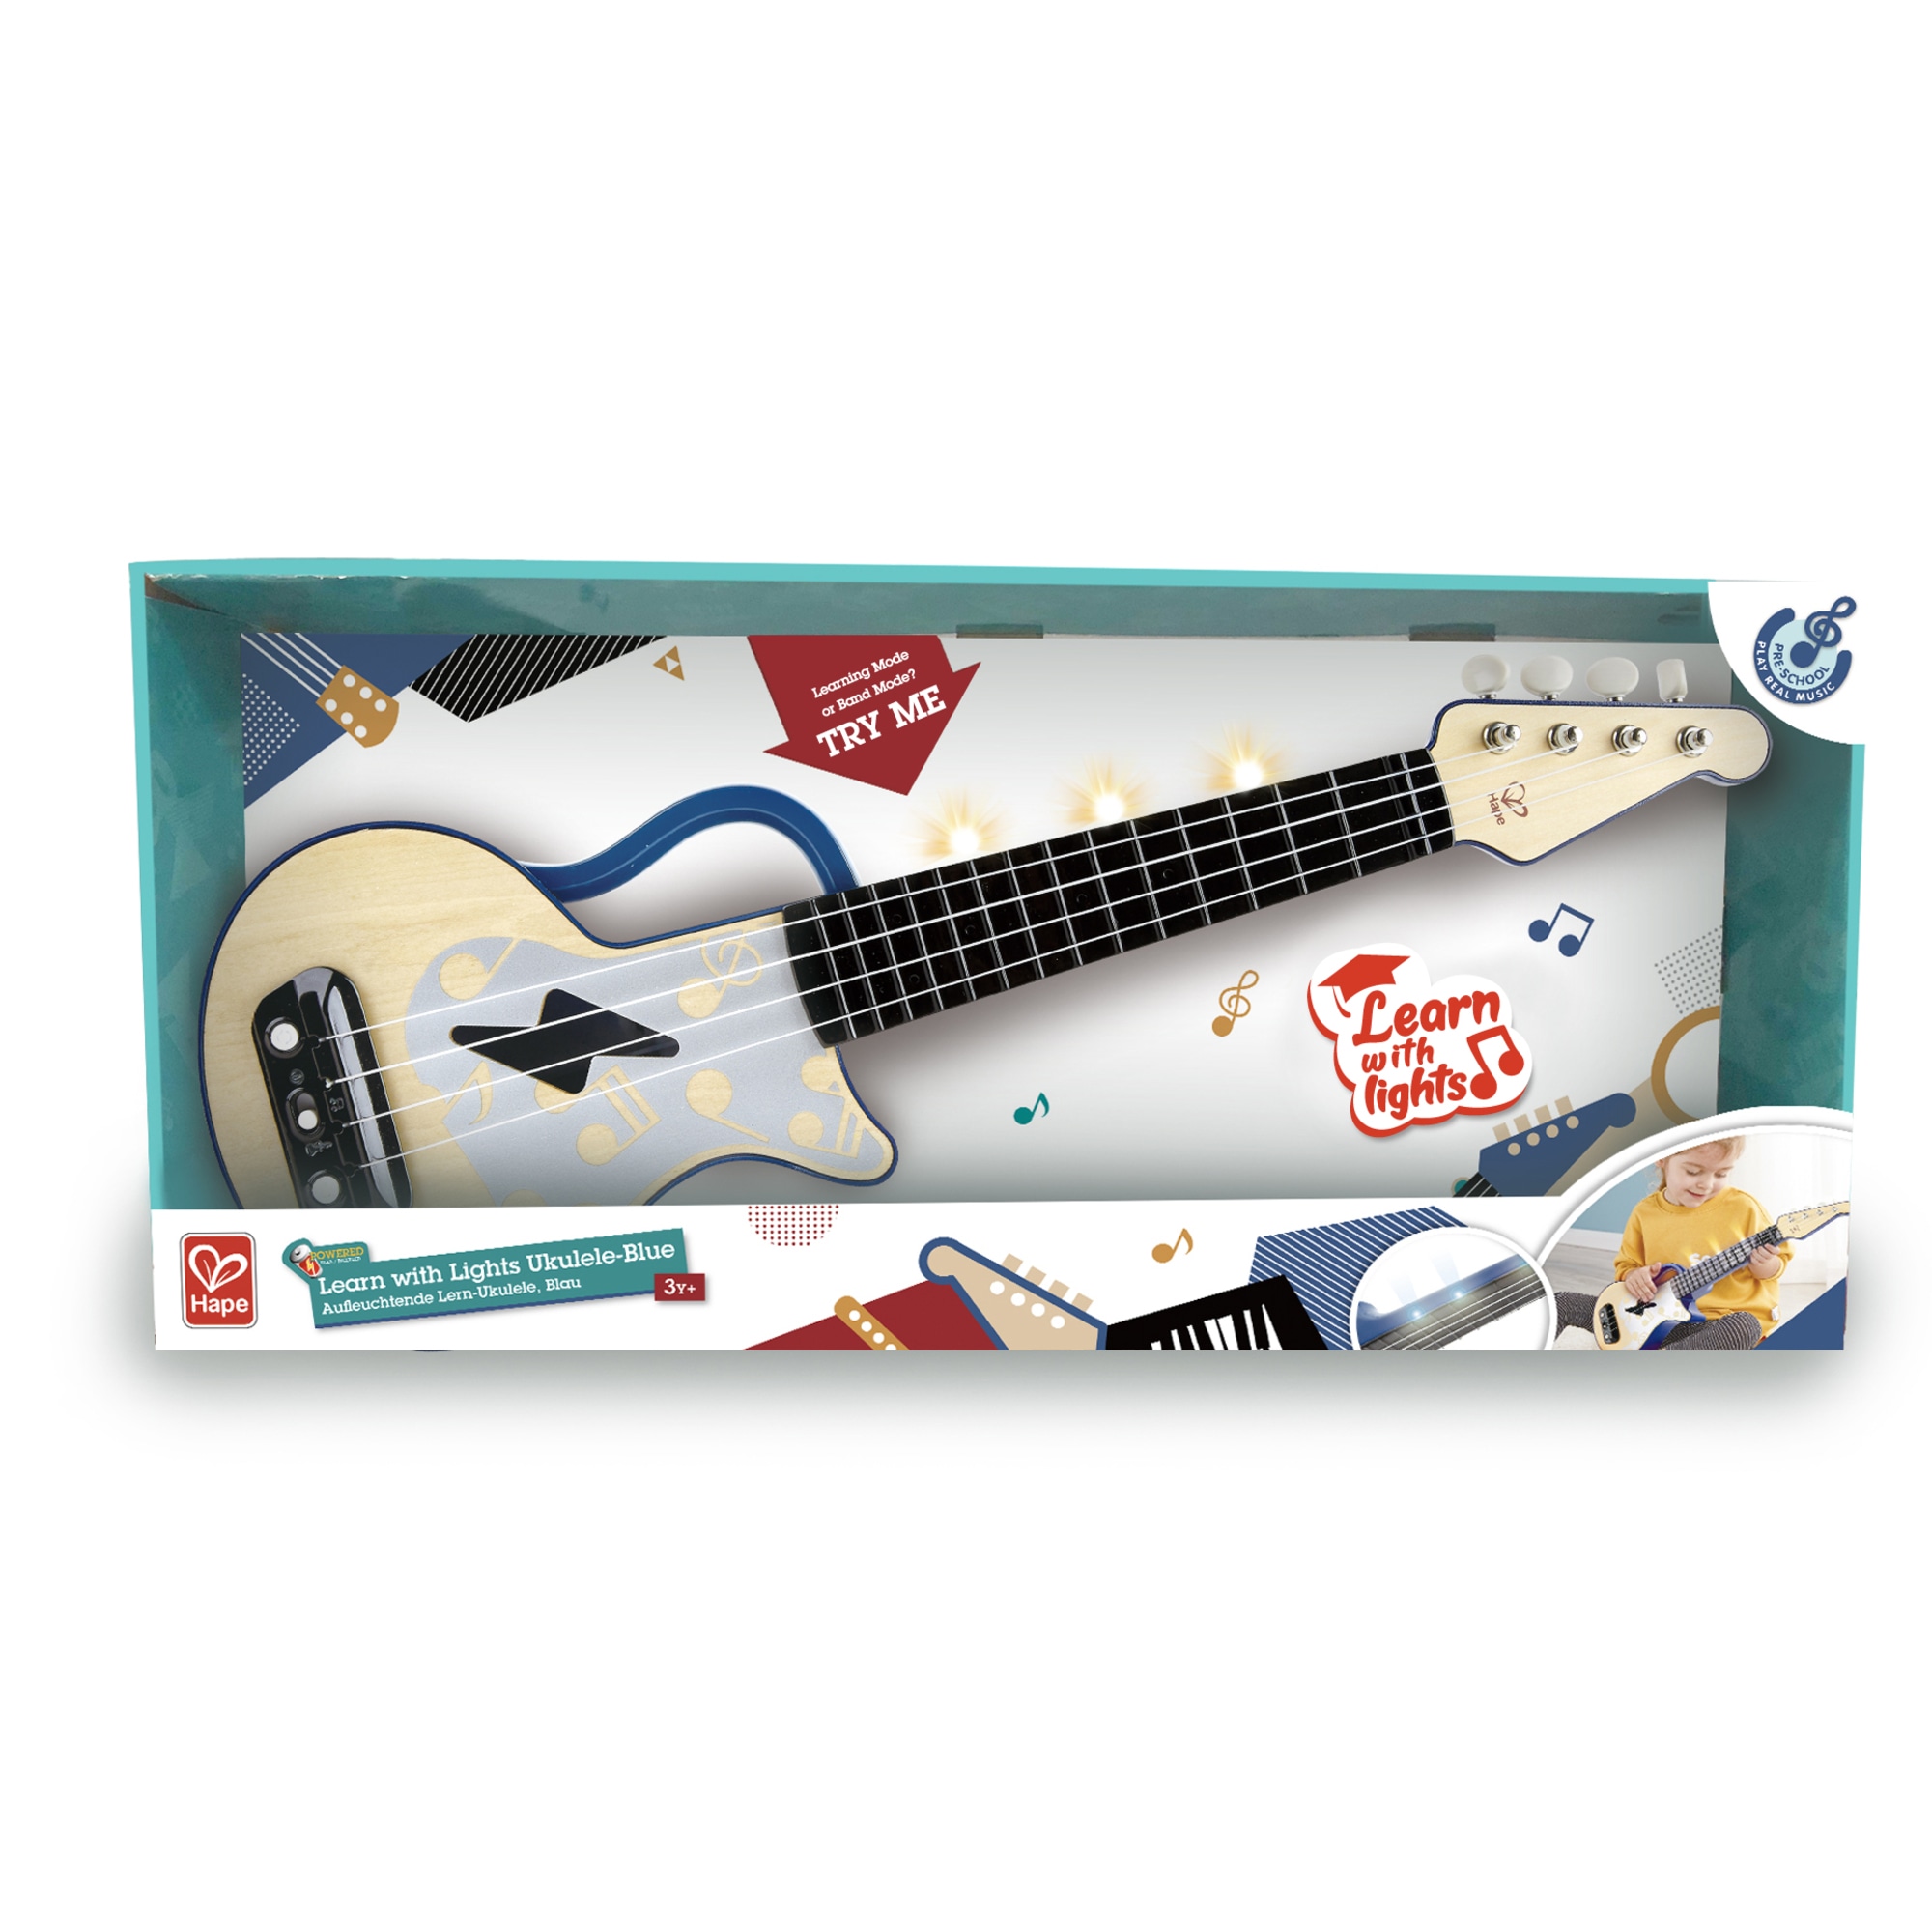 Hape Learn With Lights Kid's Electronic Ukulele in Blue - image 6 of 8